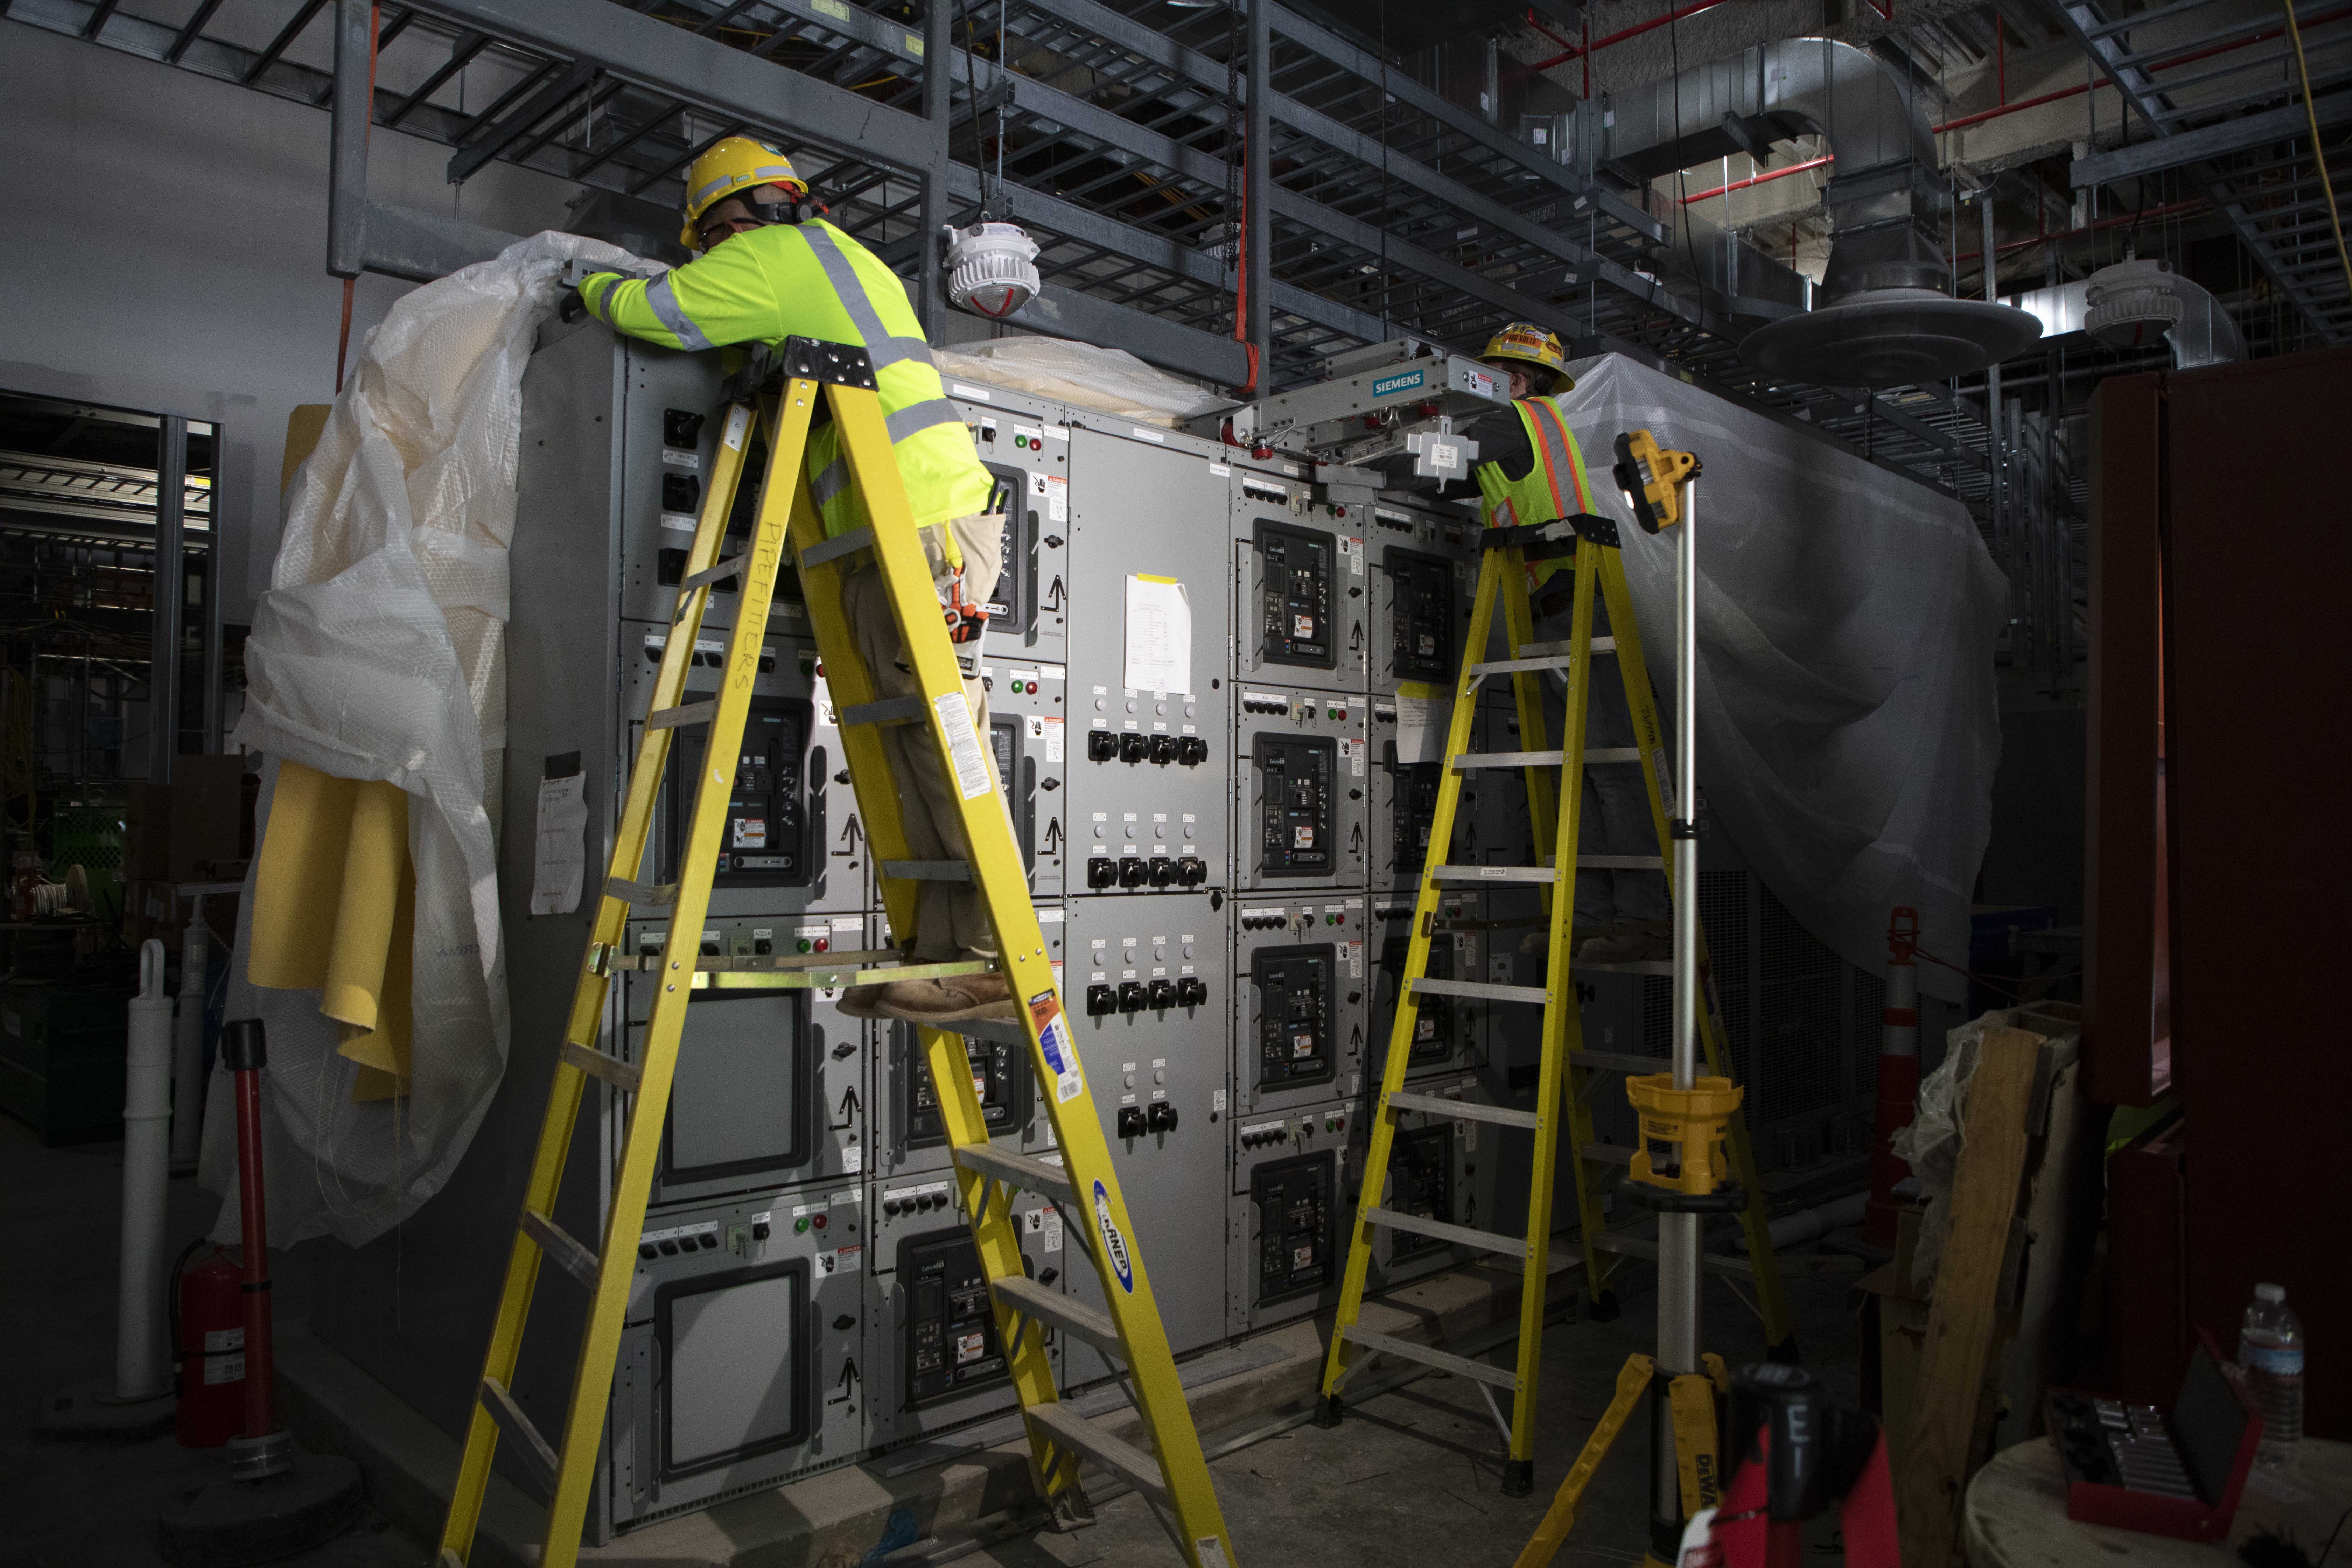 Installation of the 13.8kV switchgear in the Uranium Processing Facility’s Mechanical Electrical Building